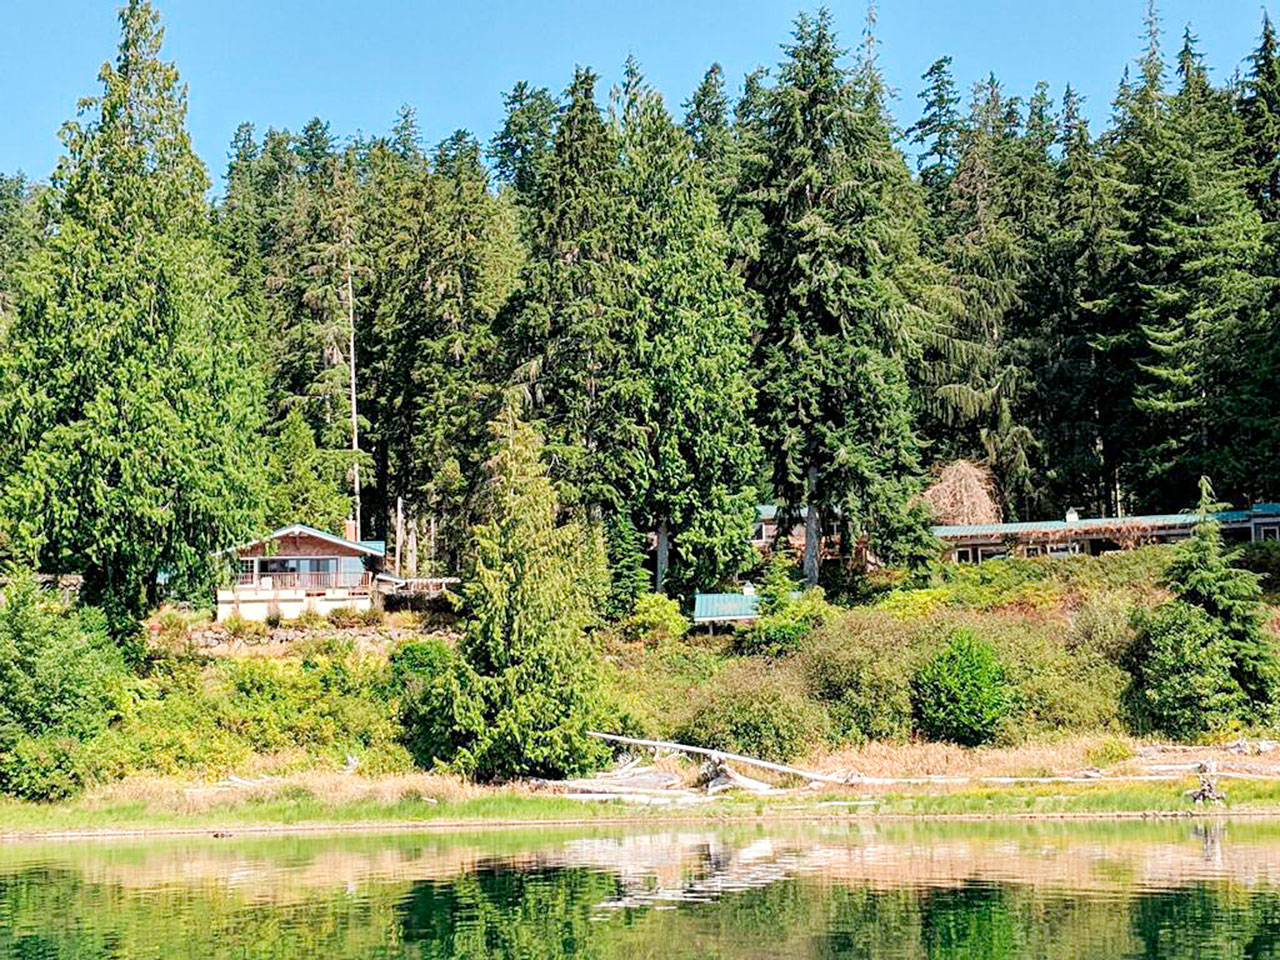 The National Park Service has begun the final steps to demolish the now-shuttered North Shore Resort on Lake Quinault on the lake’s North Shore Road. (Tom Northup)